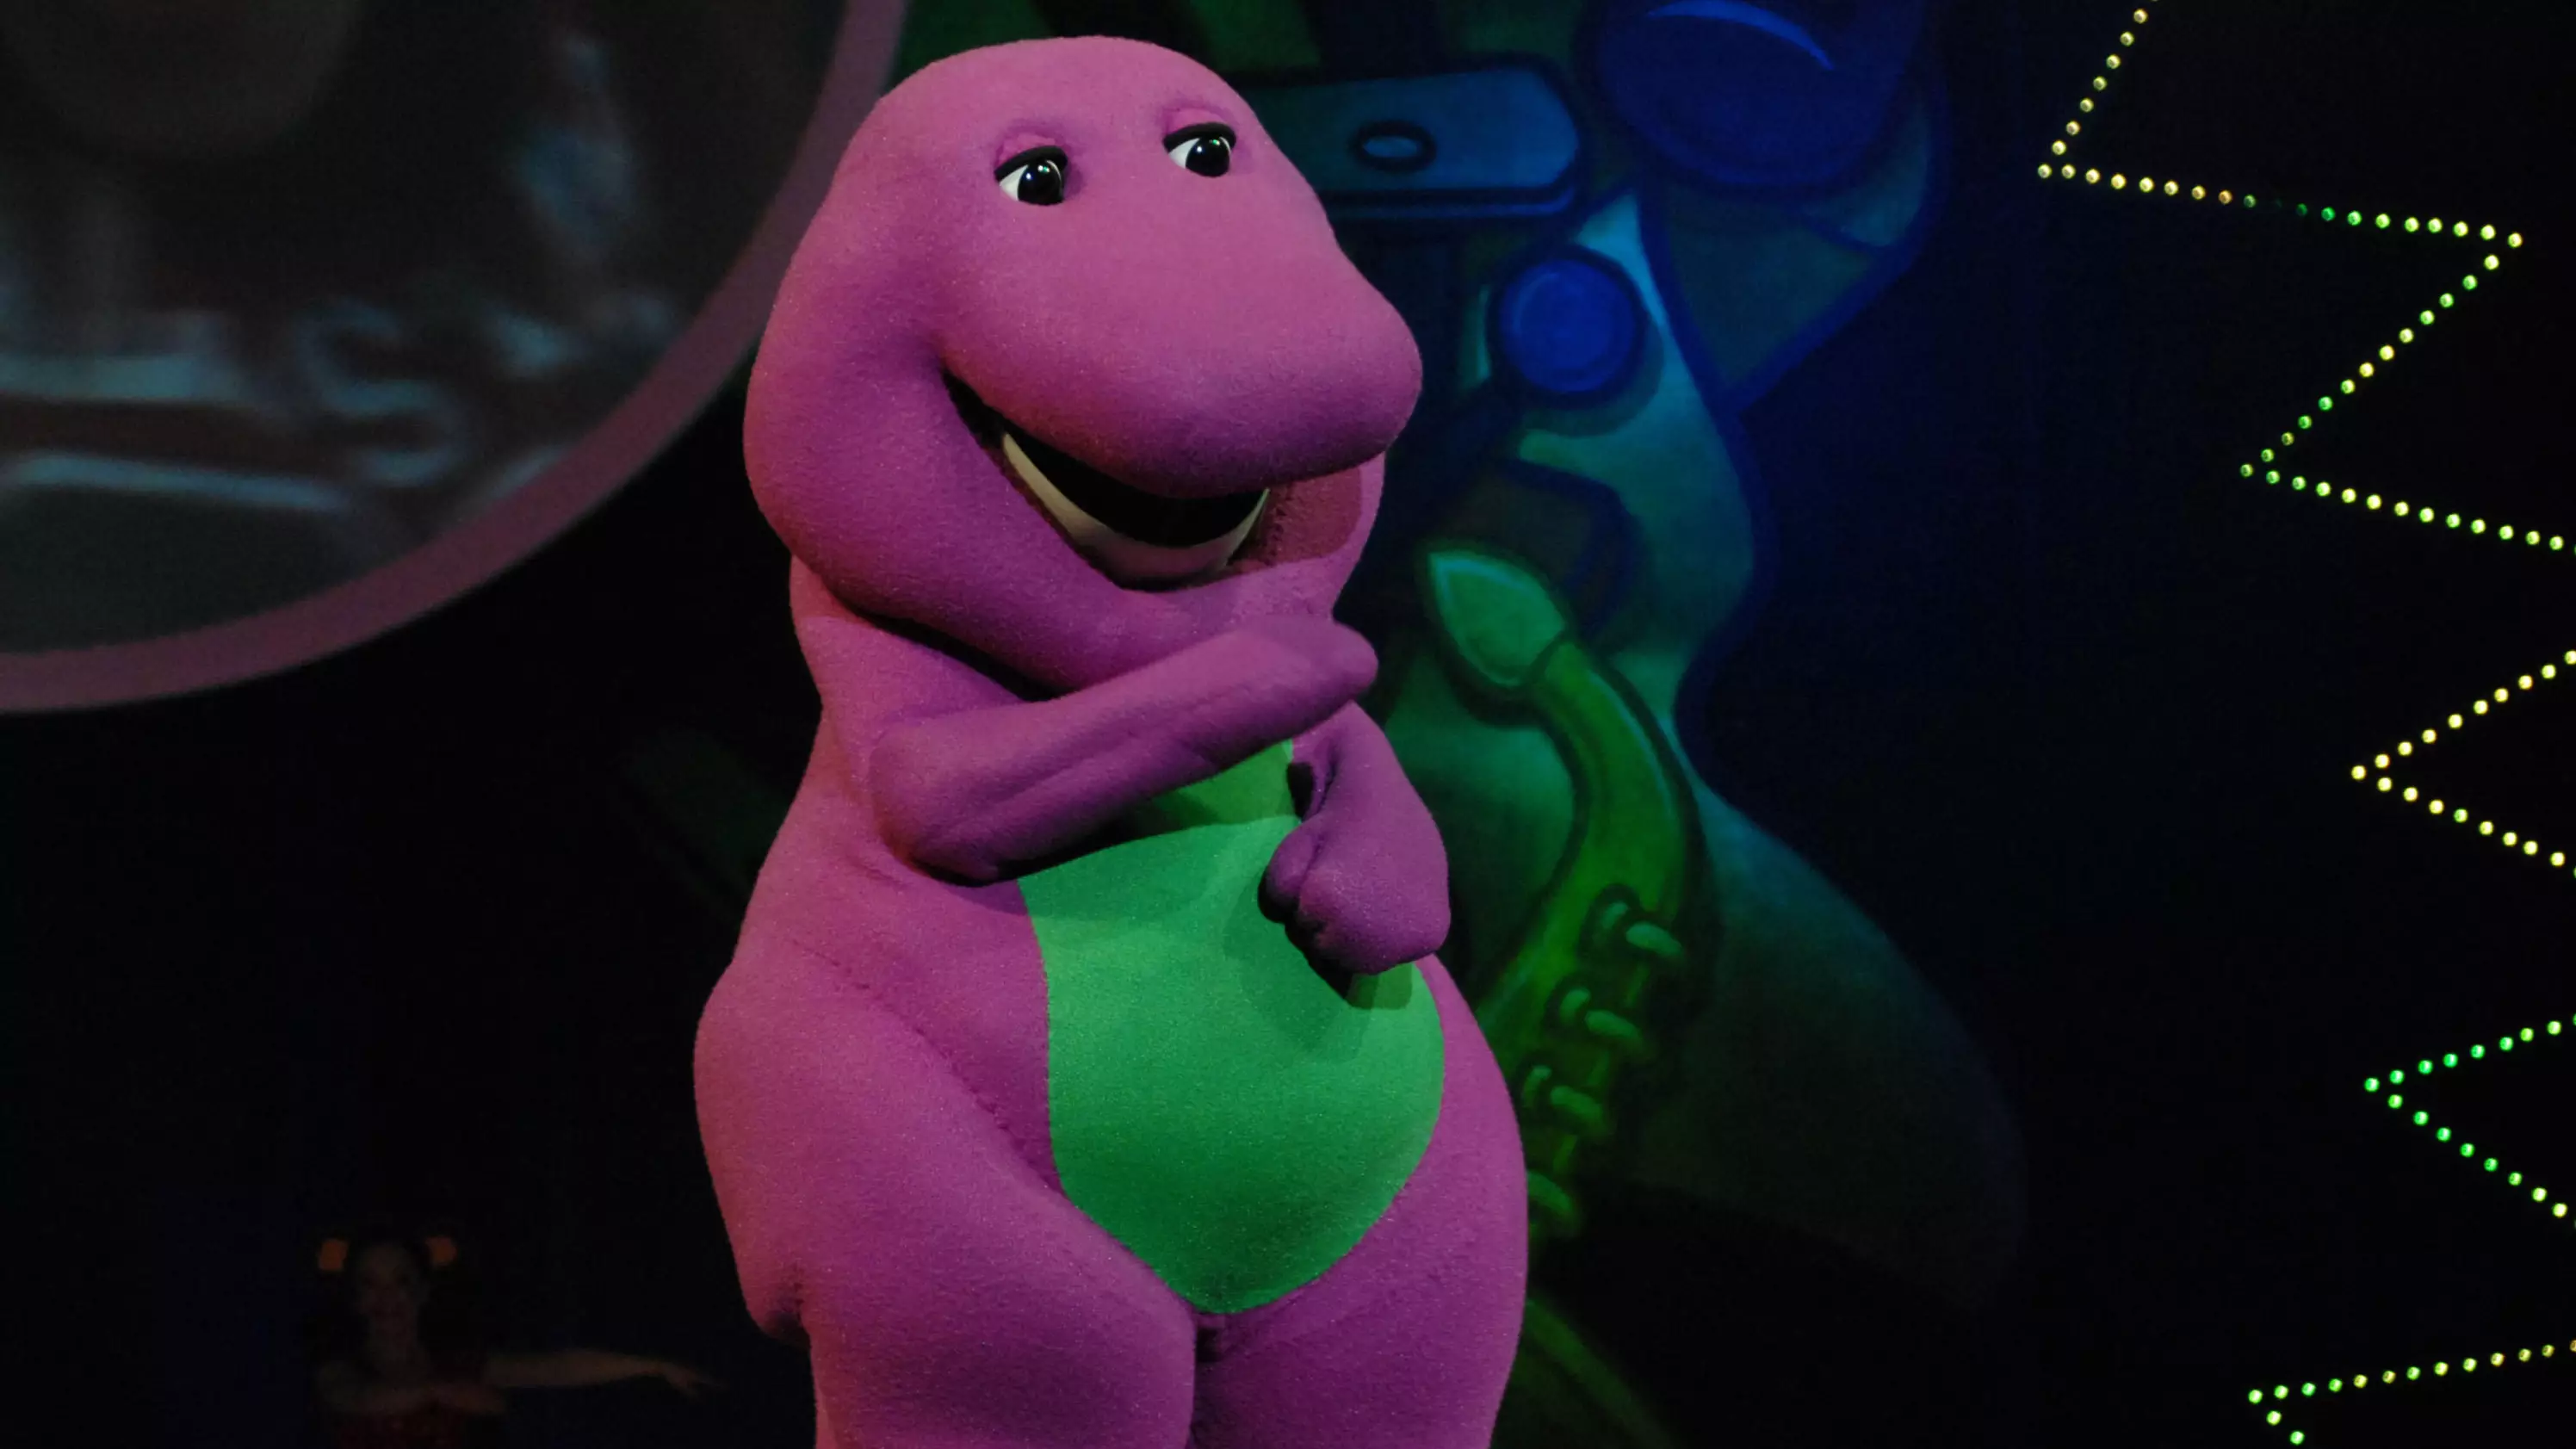 Guy Who Played Barney The Dinosaur Now Runs Tantric Sex Business